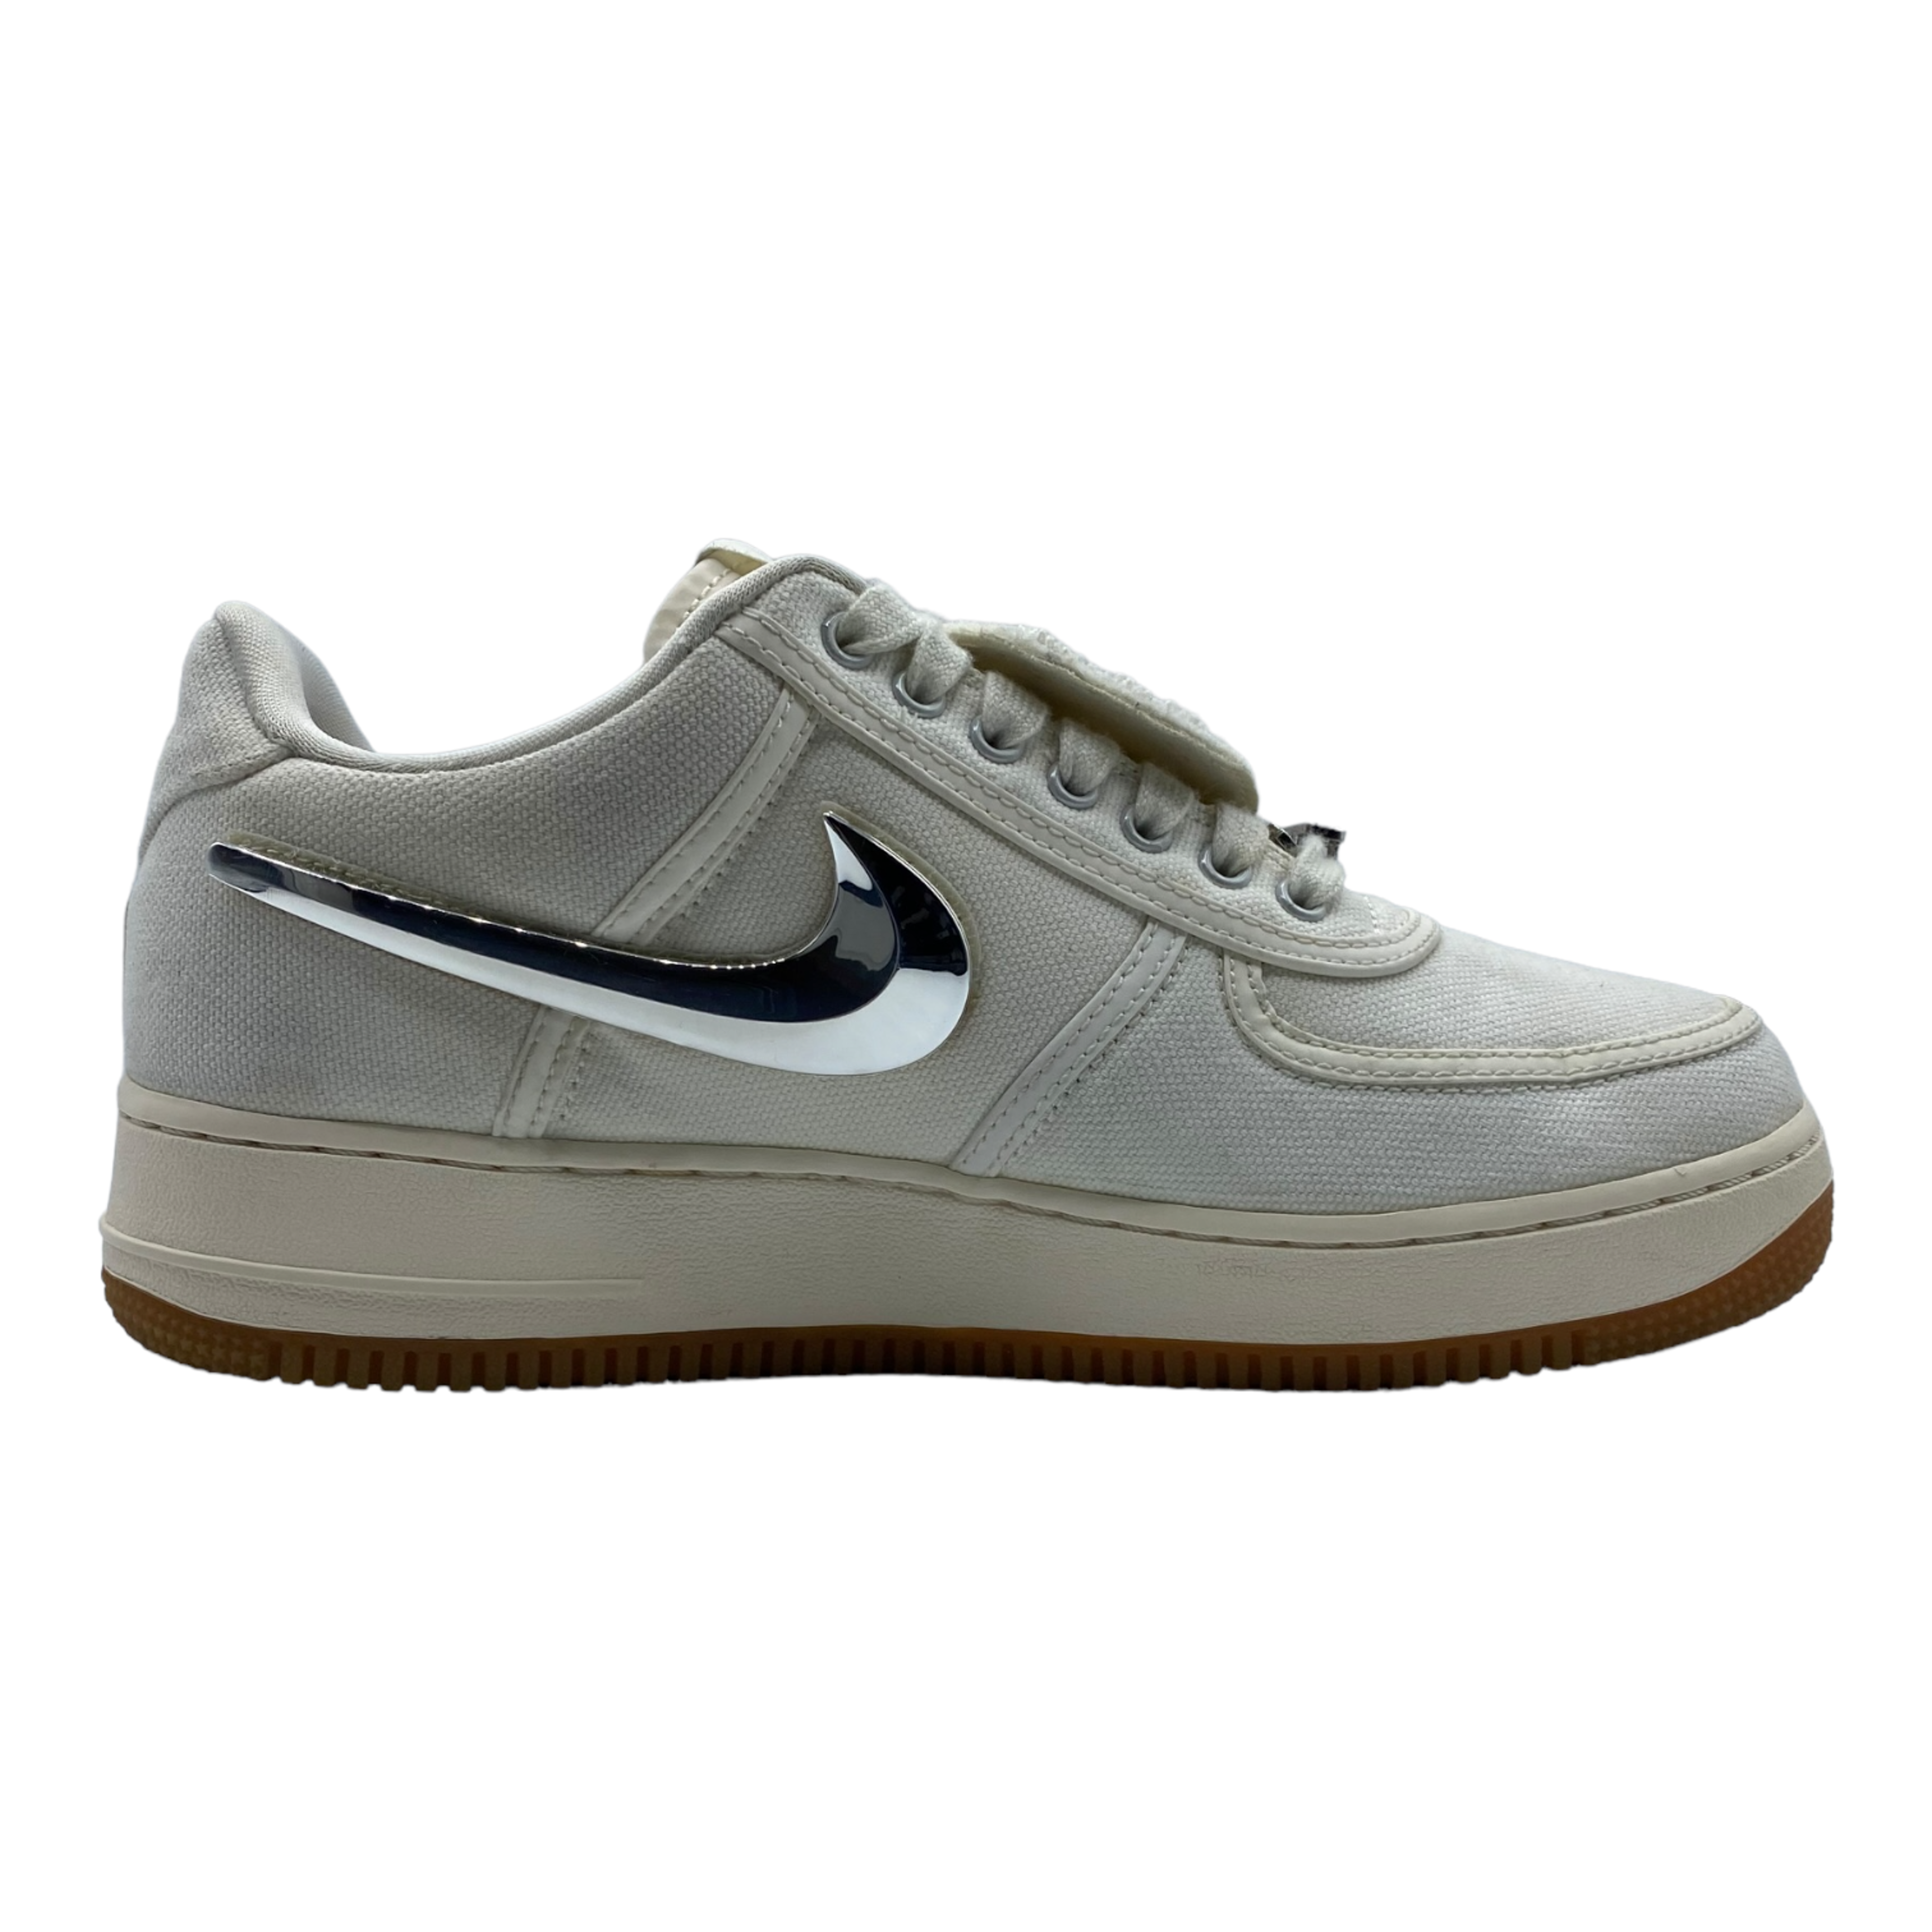 Alternate View 3 of Nike Air Force 1 Low Travis Scott Sail Pre-Owned